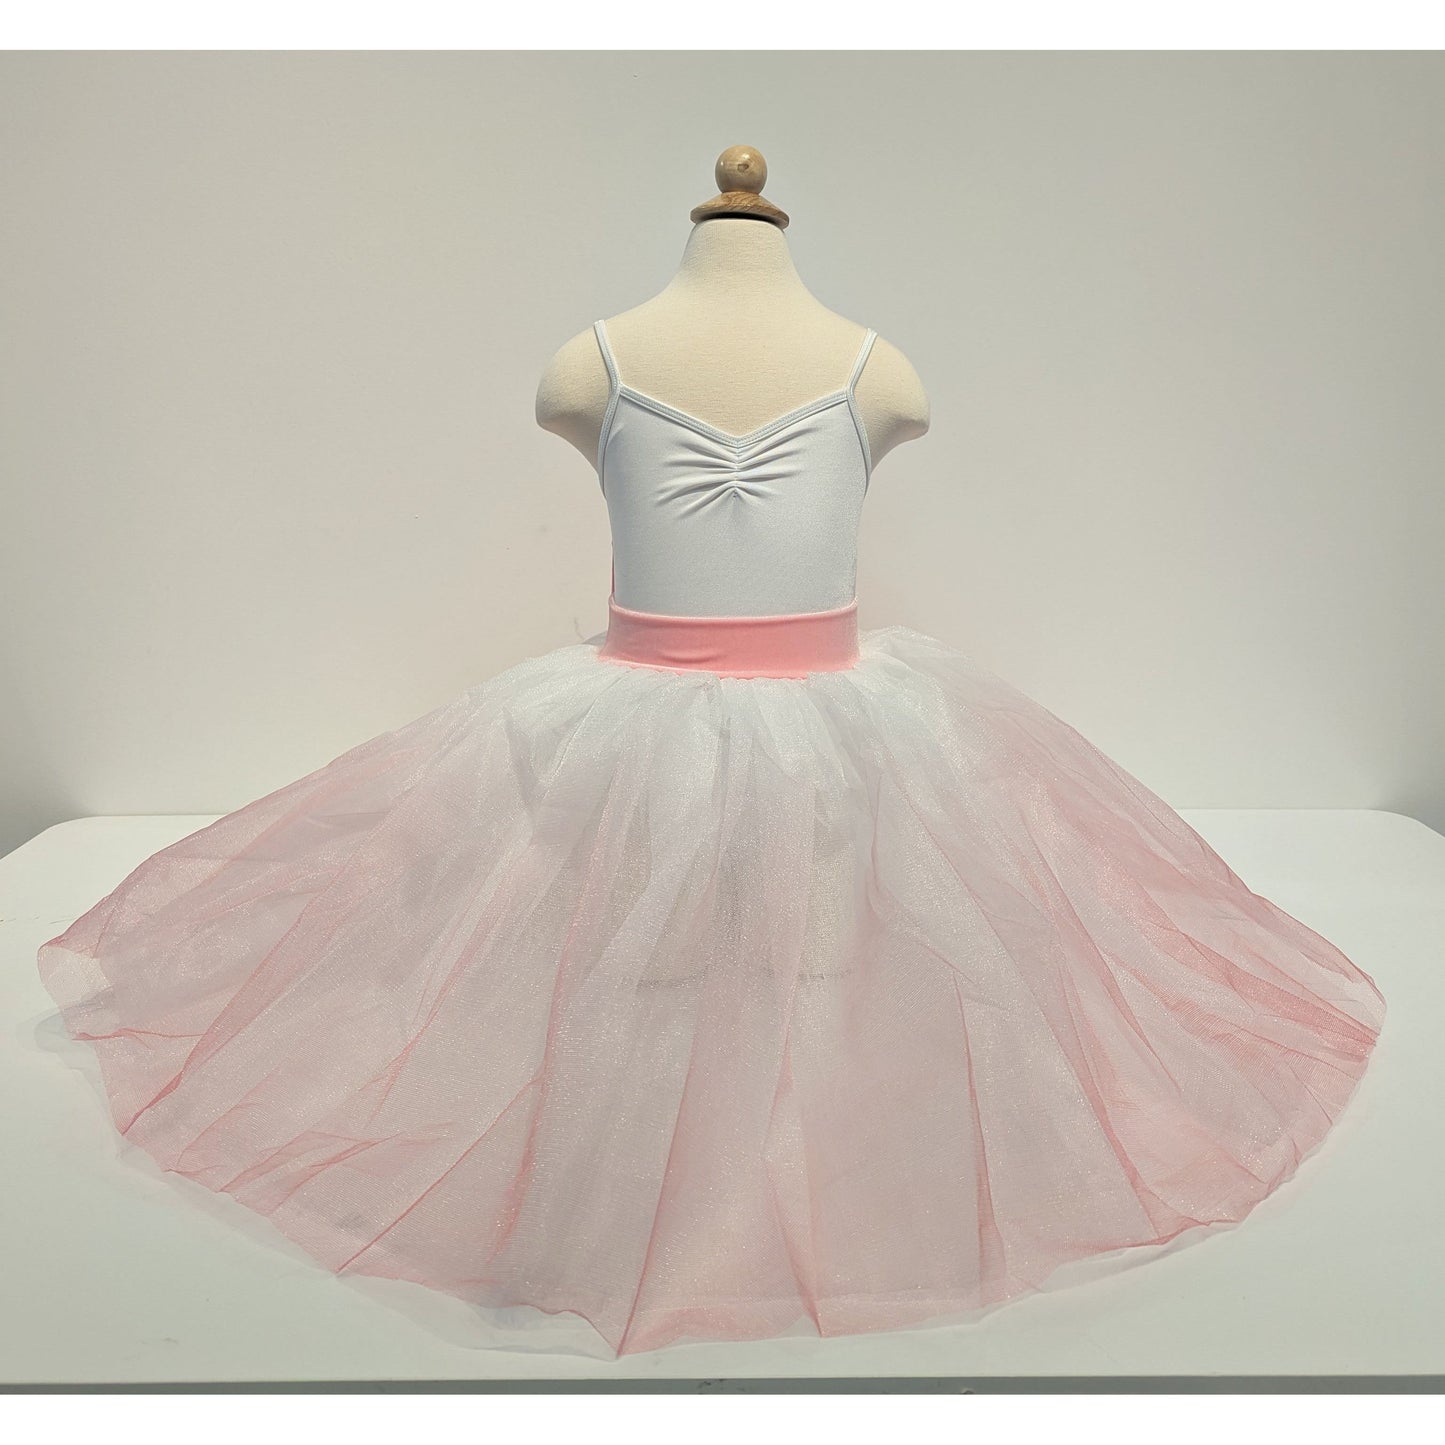 Childs White and Pink Ballet Dress